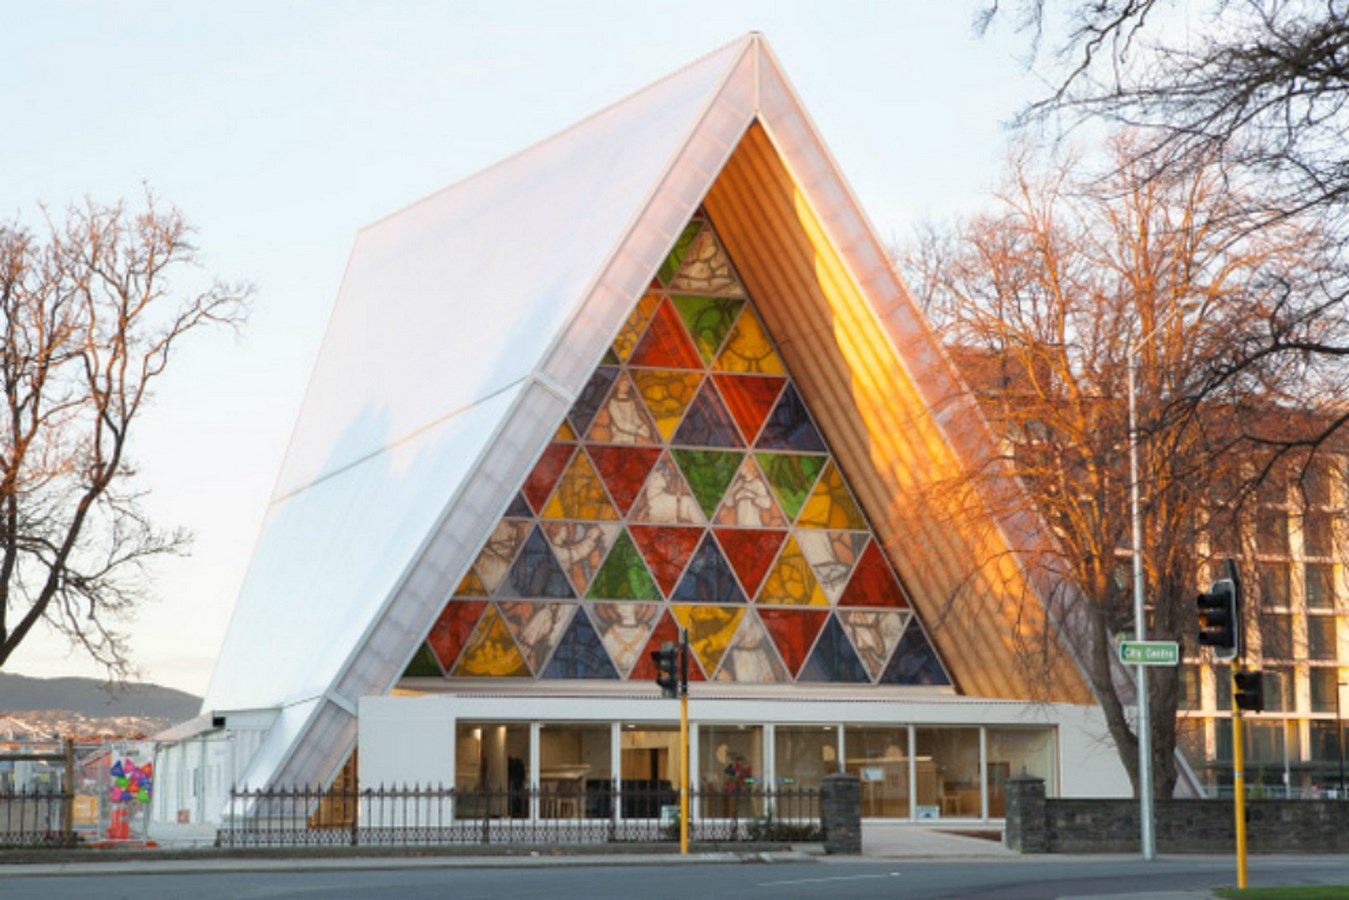 The Evolution of Spiritual Architecture in the last 60 Years - CARDBOARD CATHEDRAL, NEW ZEALAND - Sheet3